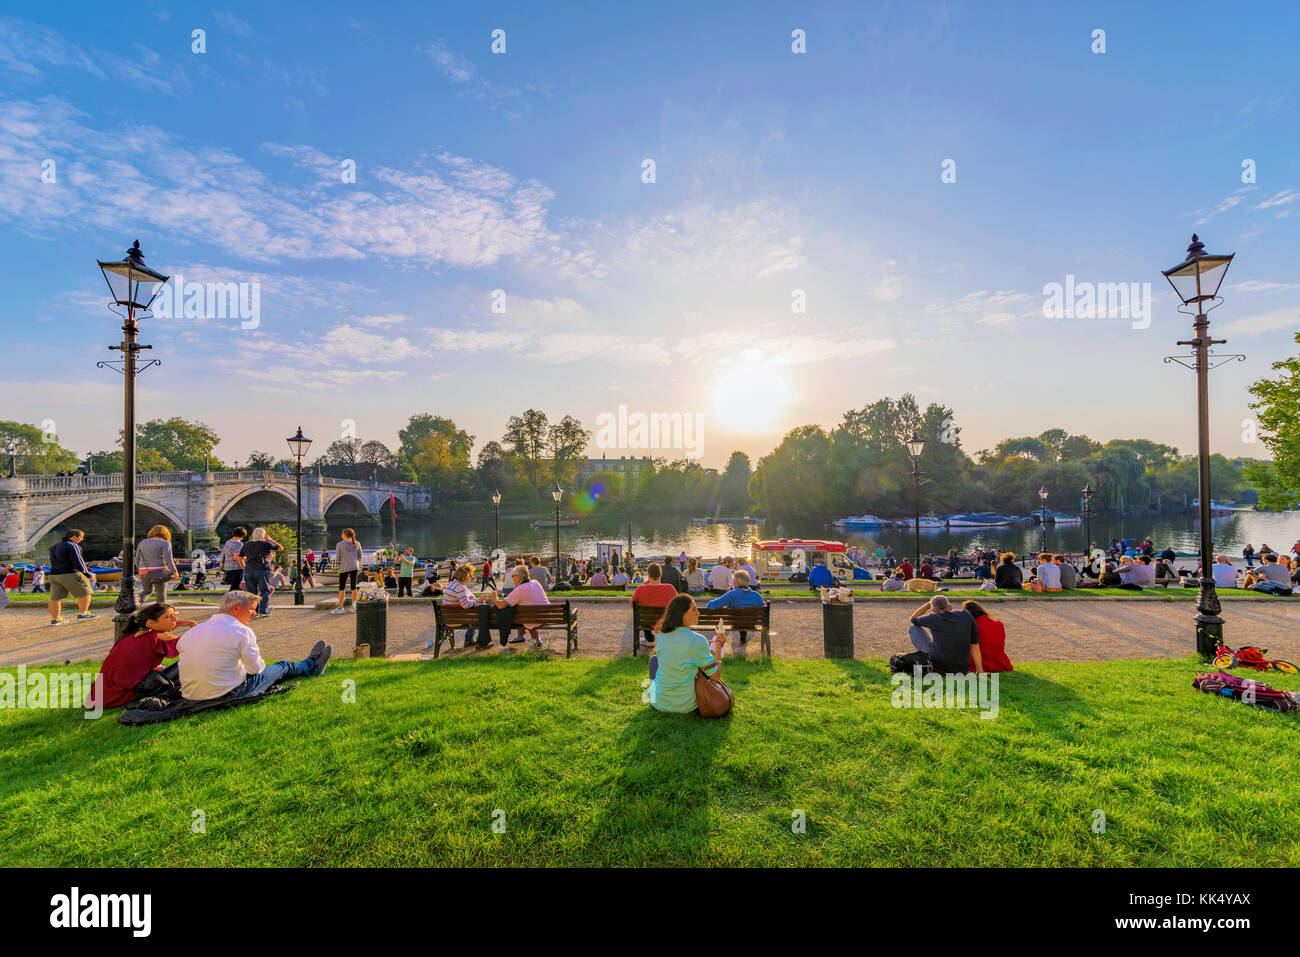 LONDON, UNITED KINGDOM - OCTOBER 16: Riverside park area of Richmond, this is a popular landmark where many people come to relax on October 16, 2017 i Stock Photo